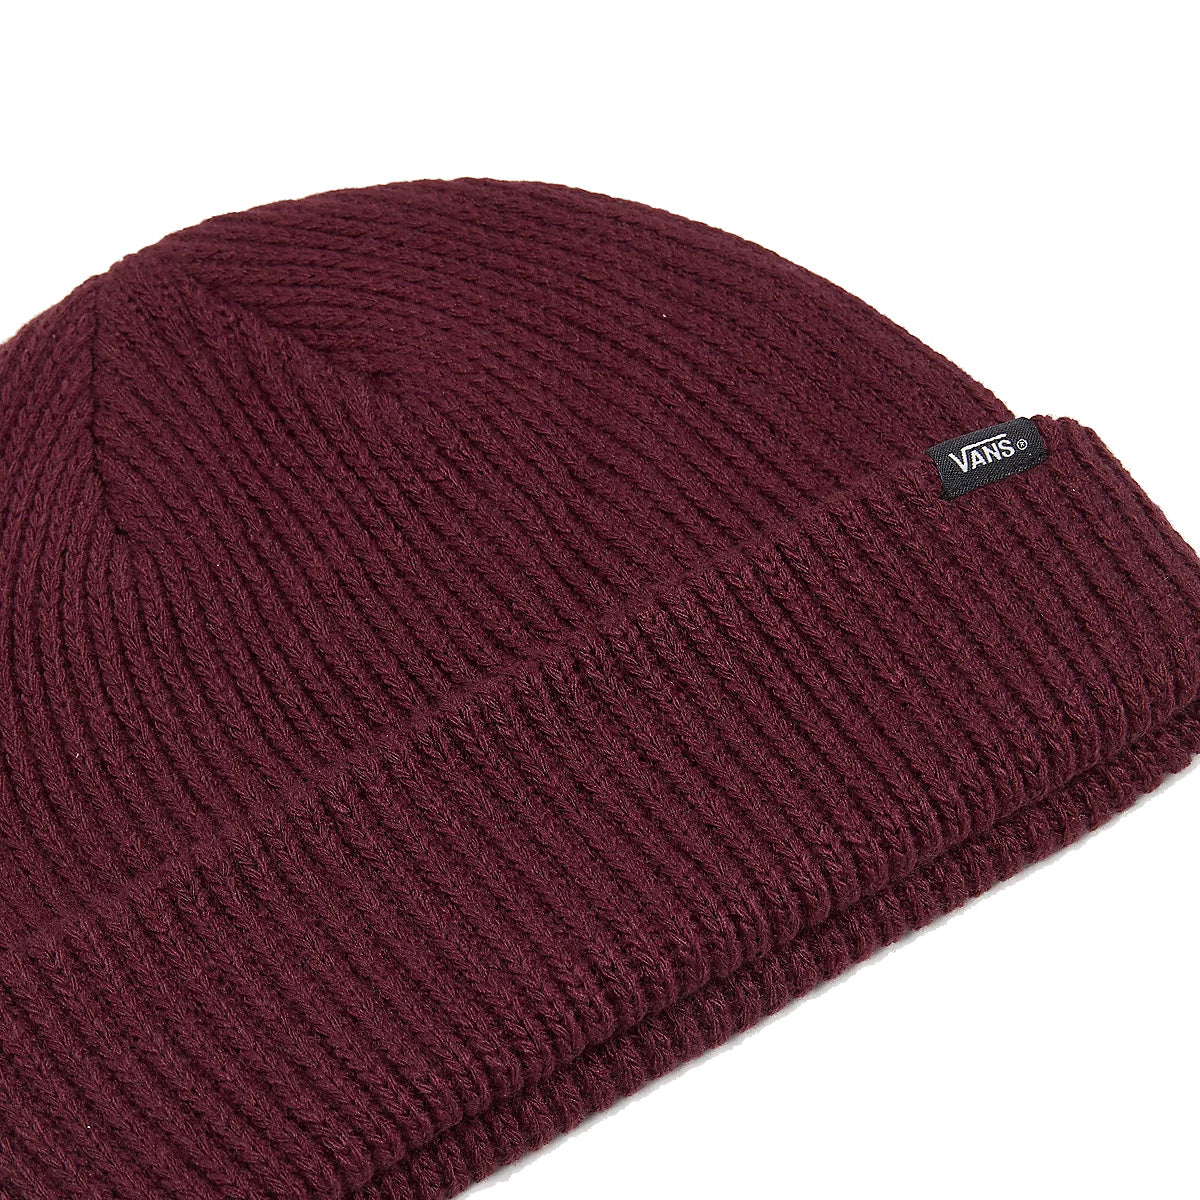 Burgundy vans cuffed and ribbed beanie with vans logo tag. Free uk shipping over £50